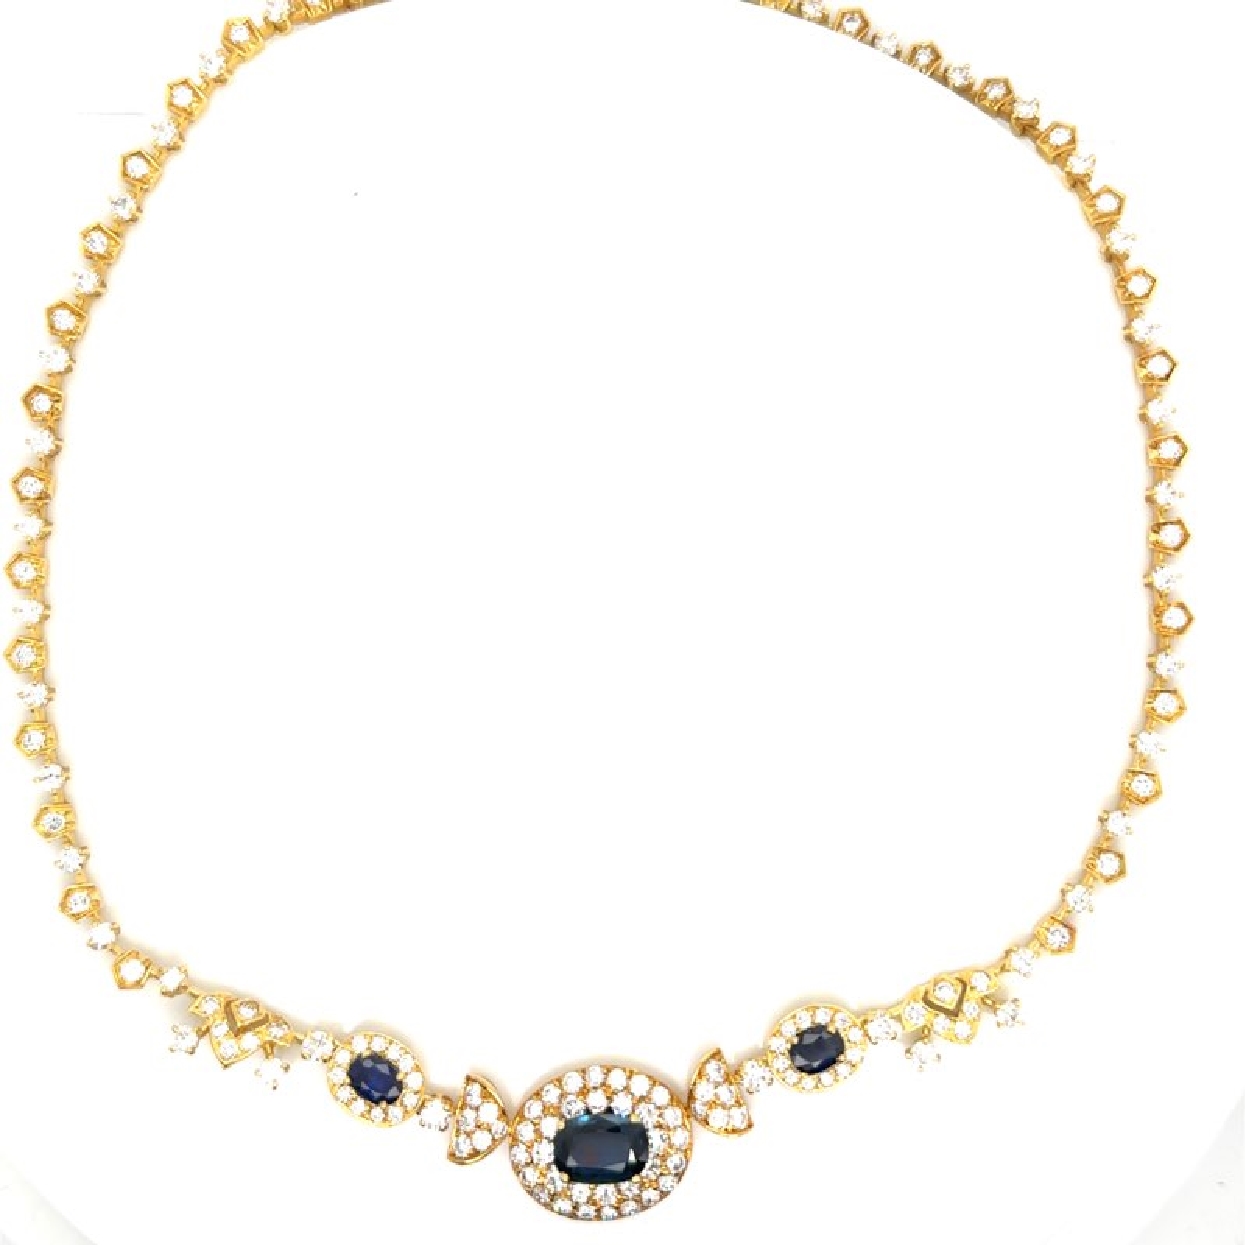 18K Yellow Gold Sapphire and Diamond Necklace 15 Inches 
2.90CT Sapphire
6.75CT VS Diamonds

*With Appraisal 